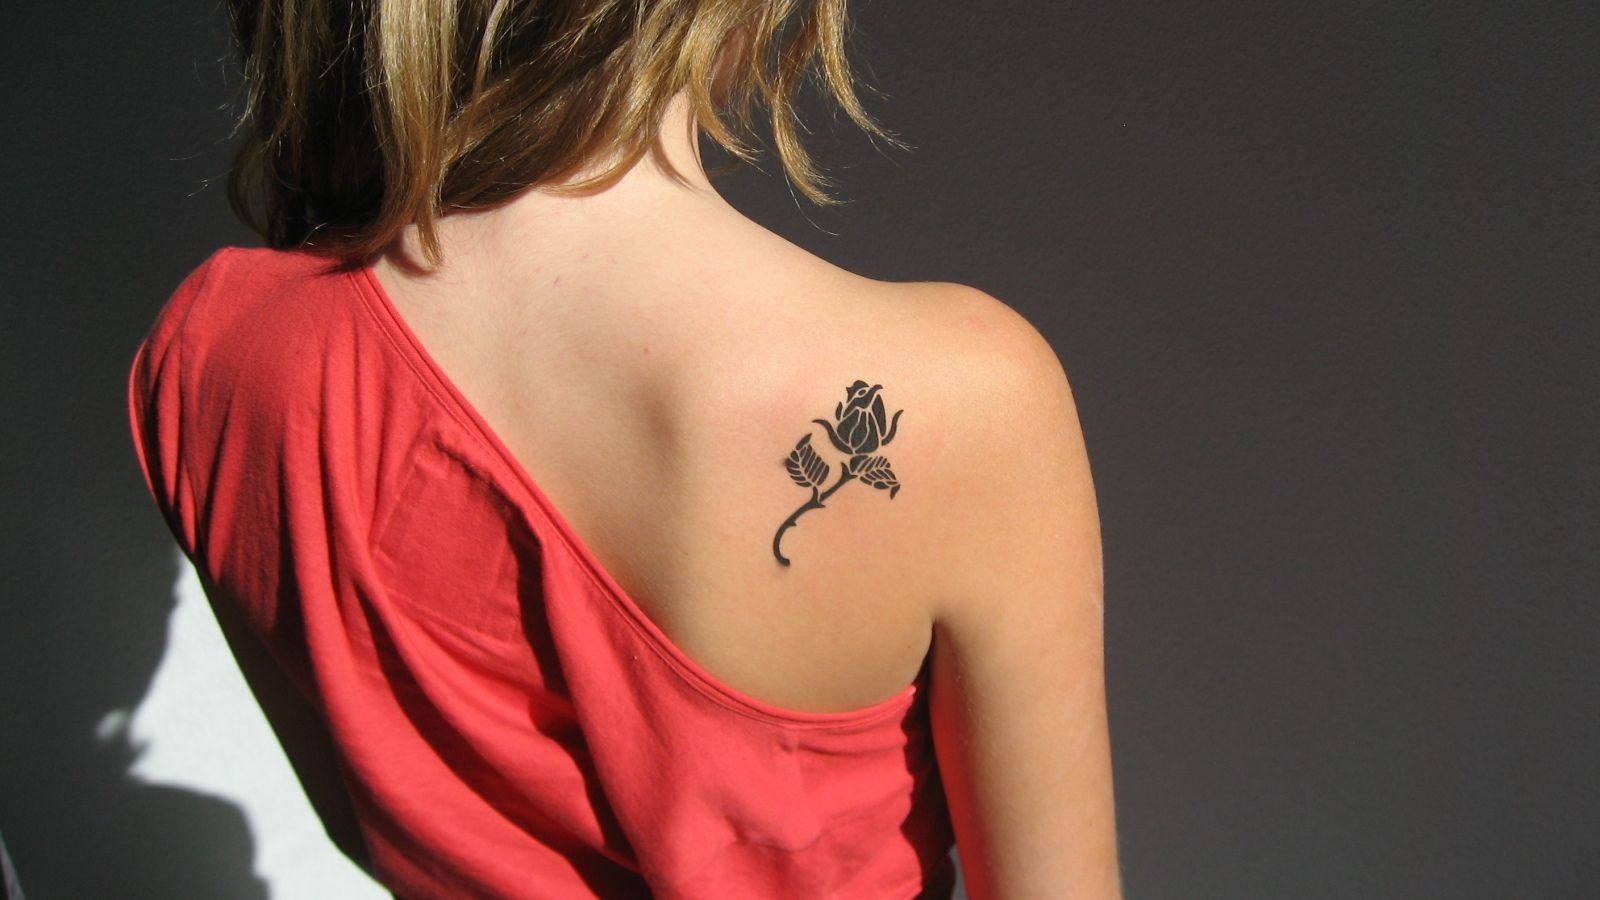 Back Shoulder Black Small Flower Tattoos Designs Tattoos with dimensions 1600 X 900